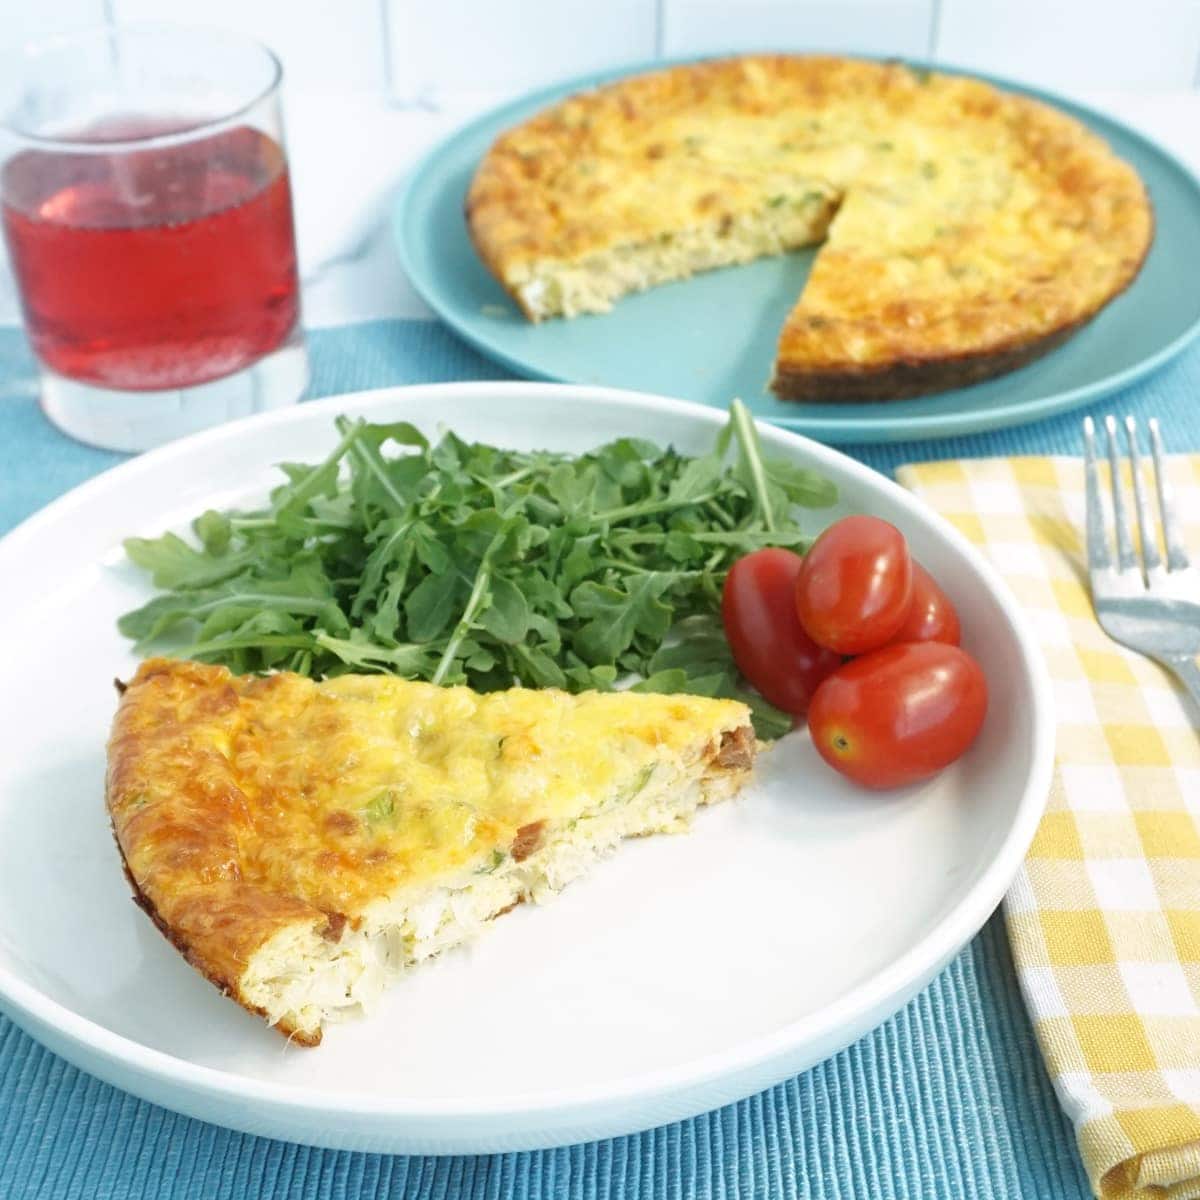 Plate of quiche with arugula and tomato on the side